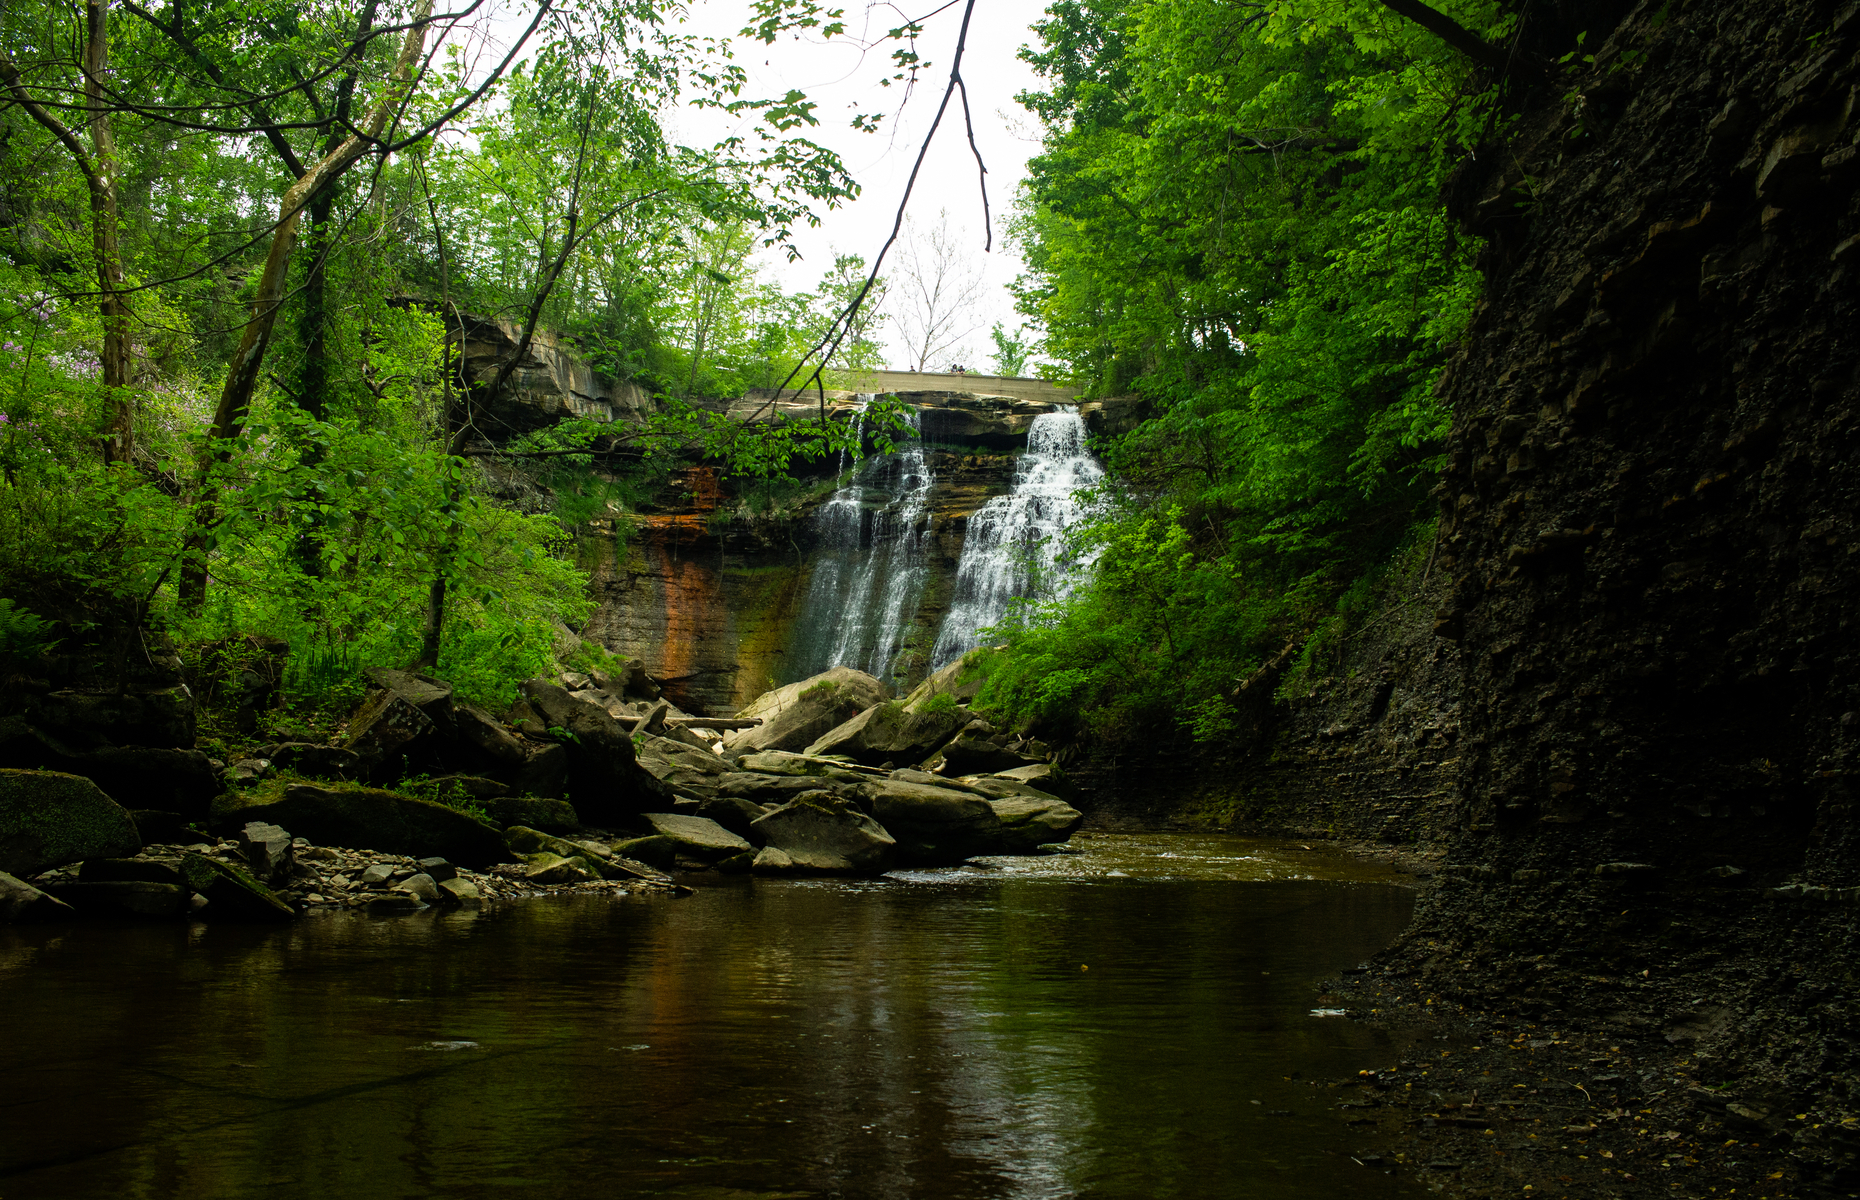 <p>Ohio isn’t just about its rivers and lakes—it has many beautiful waterfalls that <a href="https://www.onlyinyourstate.com/ohio/waterfalls-road-trip-oh/" title="https://www.onlyinyourstate.com/ohio/waterfalls-road-trip-oh/">this route</a> will take you by in a roughly 10-hour, looping journey (depending on how long you stop). Some of the highlights you’ll fall for include Hayden Falls in a suburb of Columbus, Big Lyons Falls tumbling into a 300-foot-deep sandstone gorge, the breathtaking 65-foot waterfall flowing from Brandywine Creek, and the falls at Lanterman’s Mill. </p>